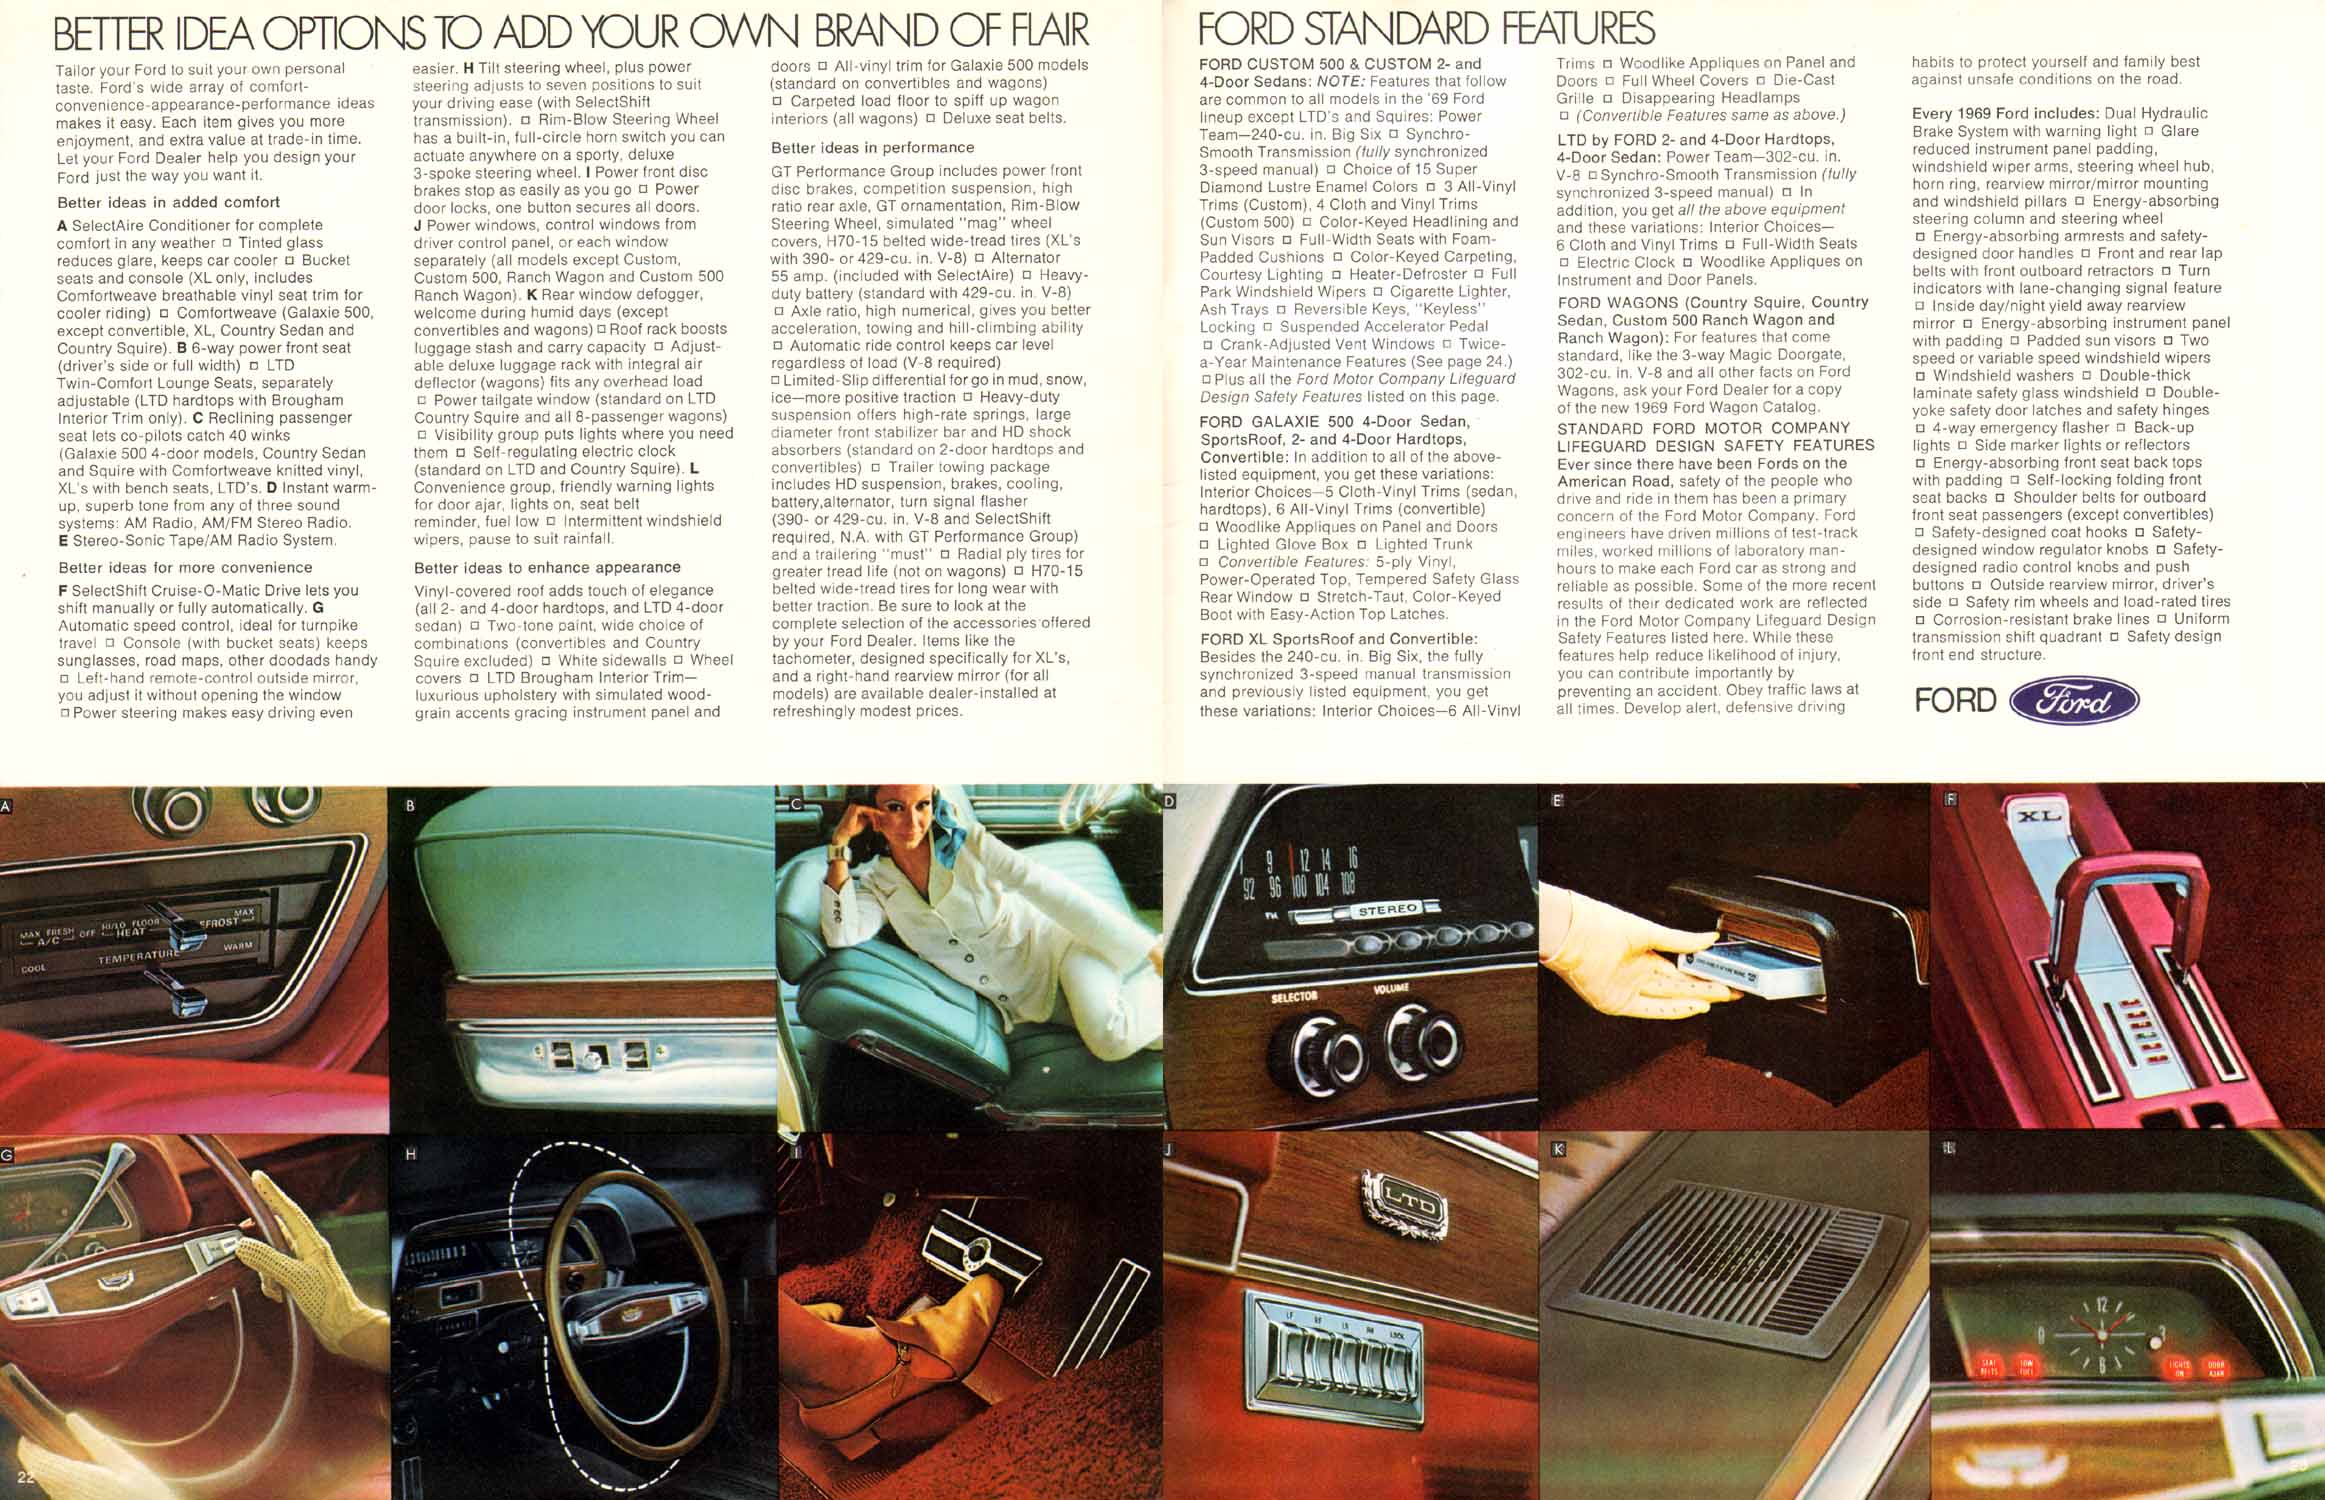 1969 Ford Full-Size Brochure Page 9